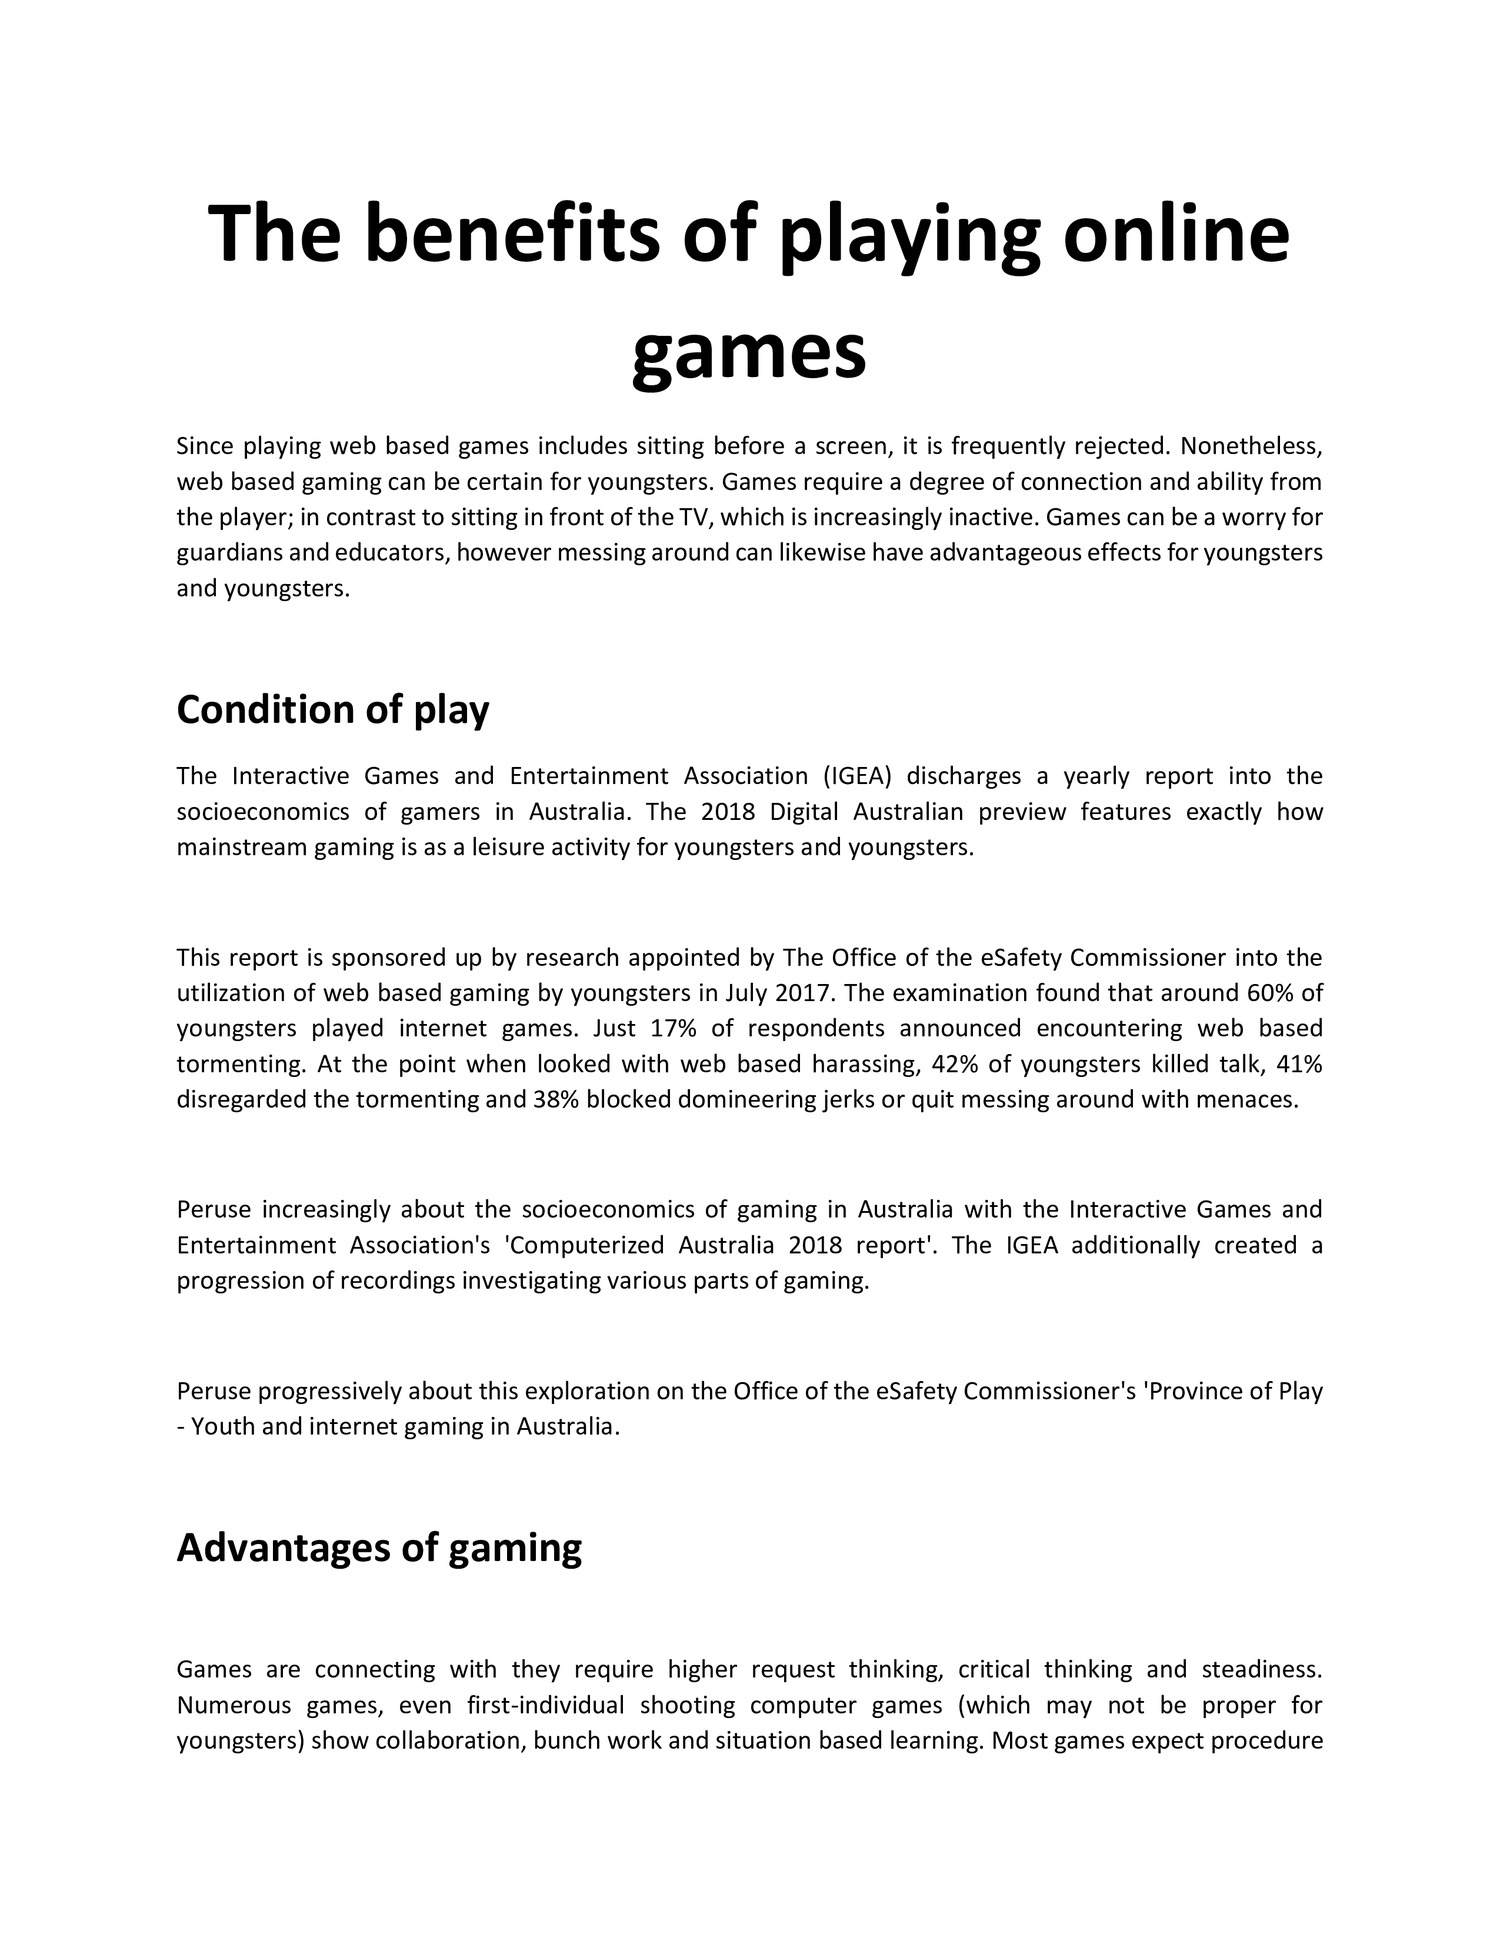 The benefits of playing online games.docx